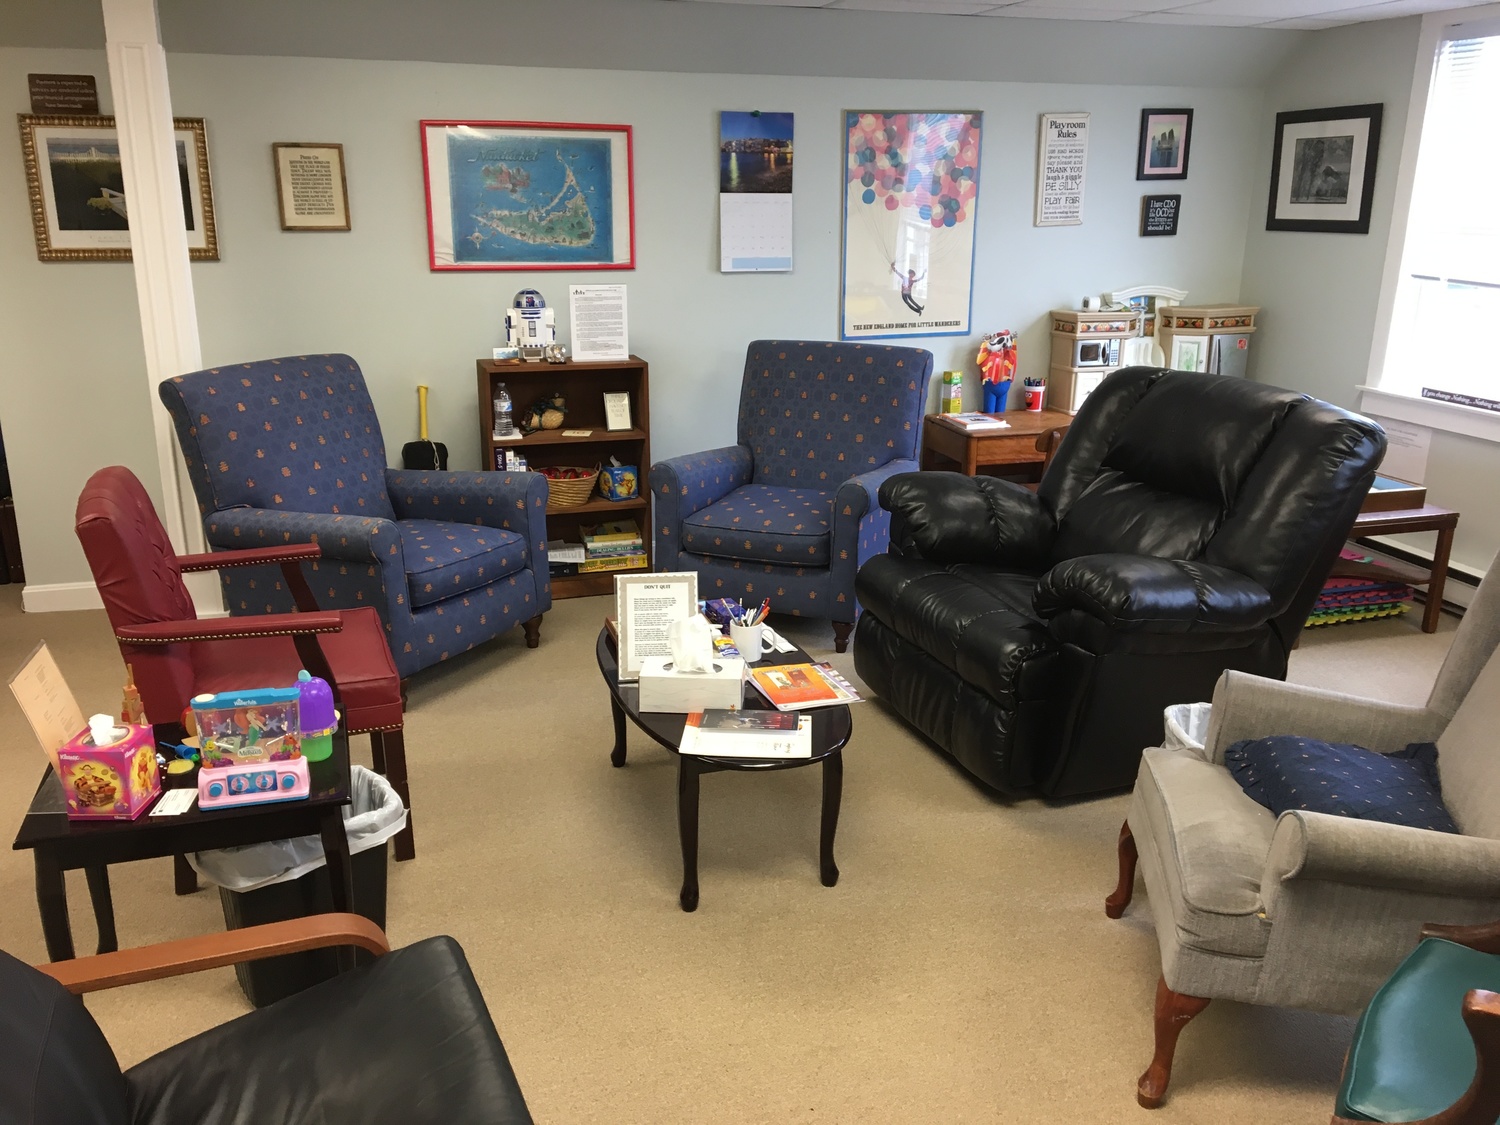 Gallery Photo of Dr. A's office in Osterville on Cape Cod.